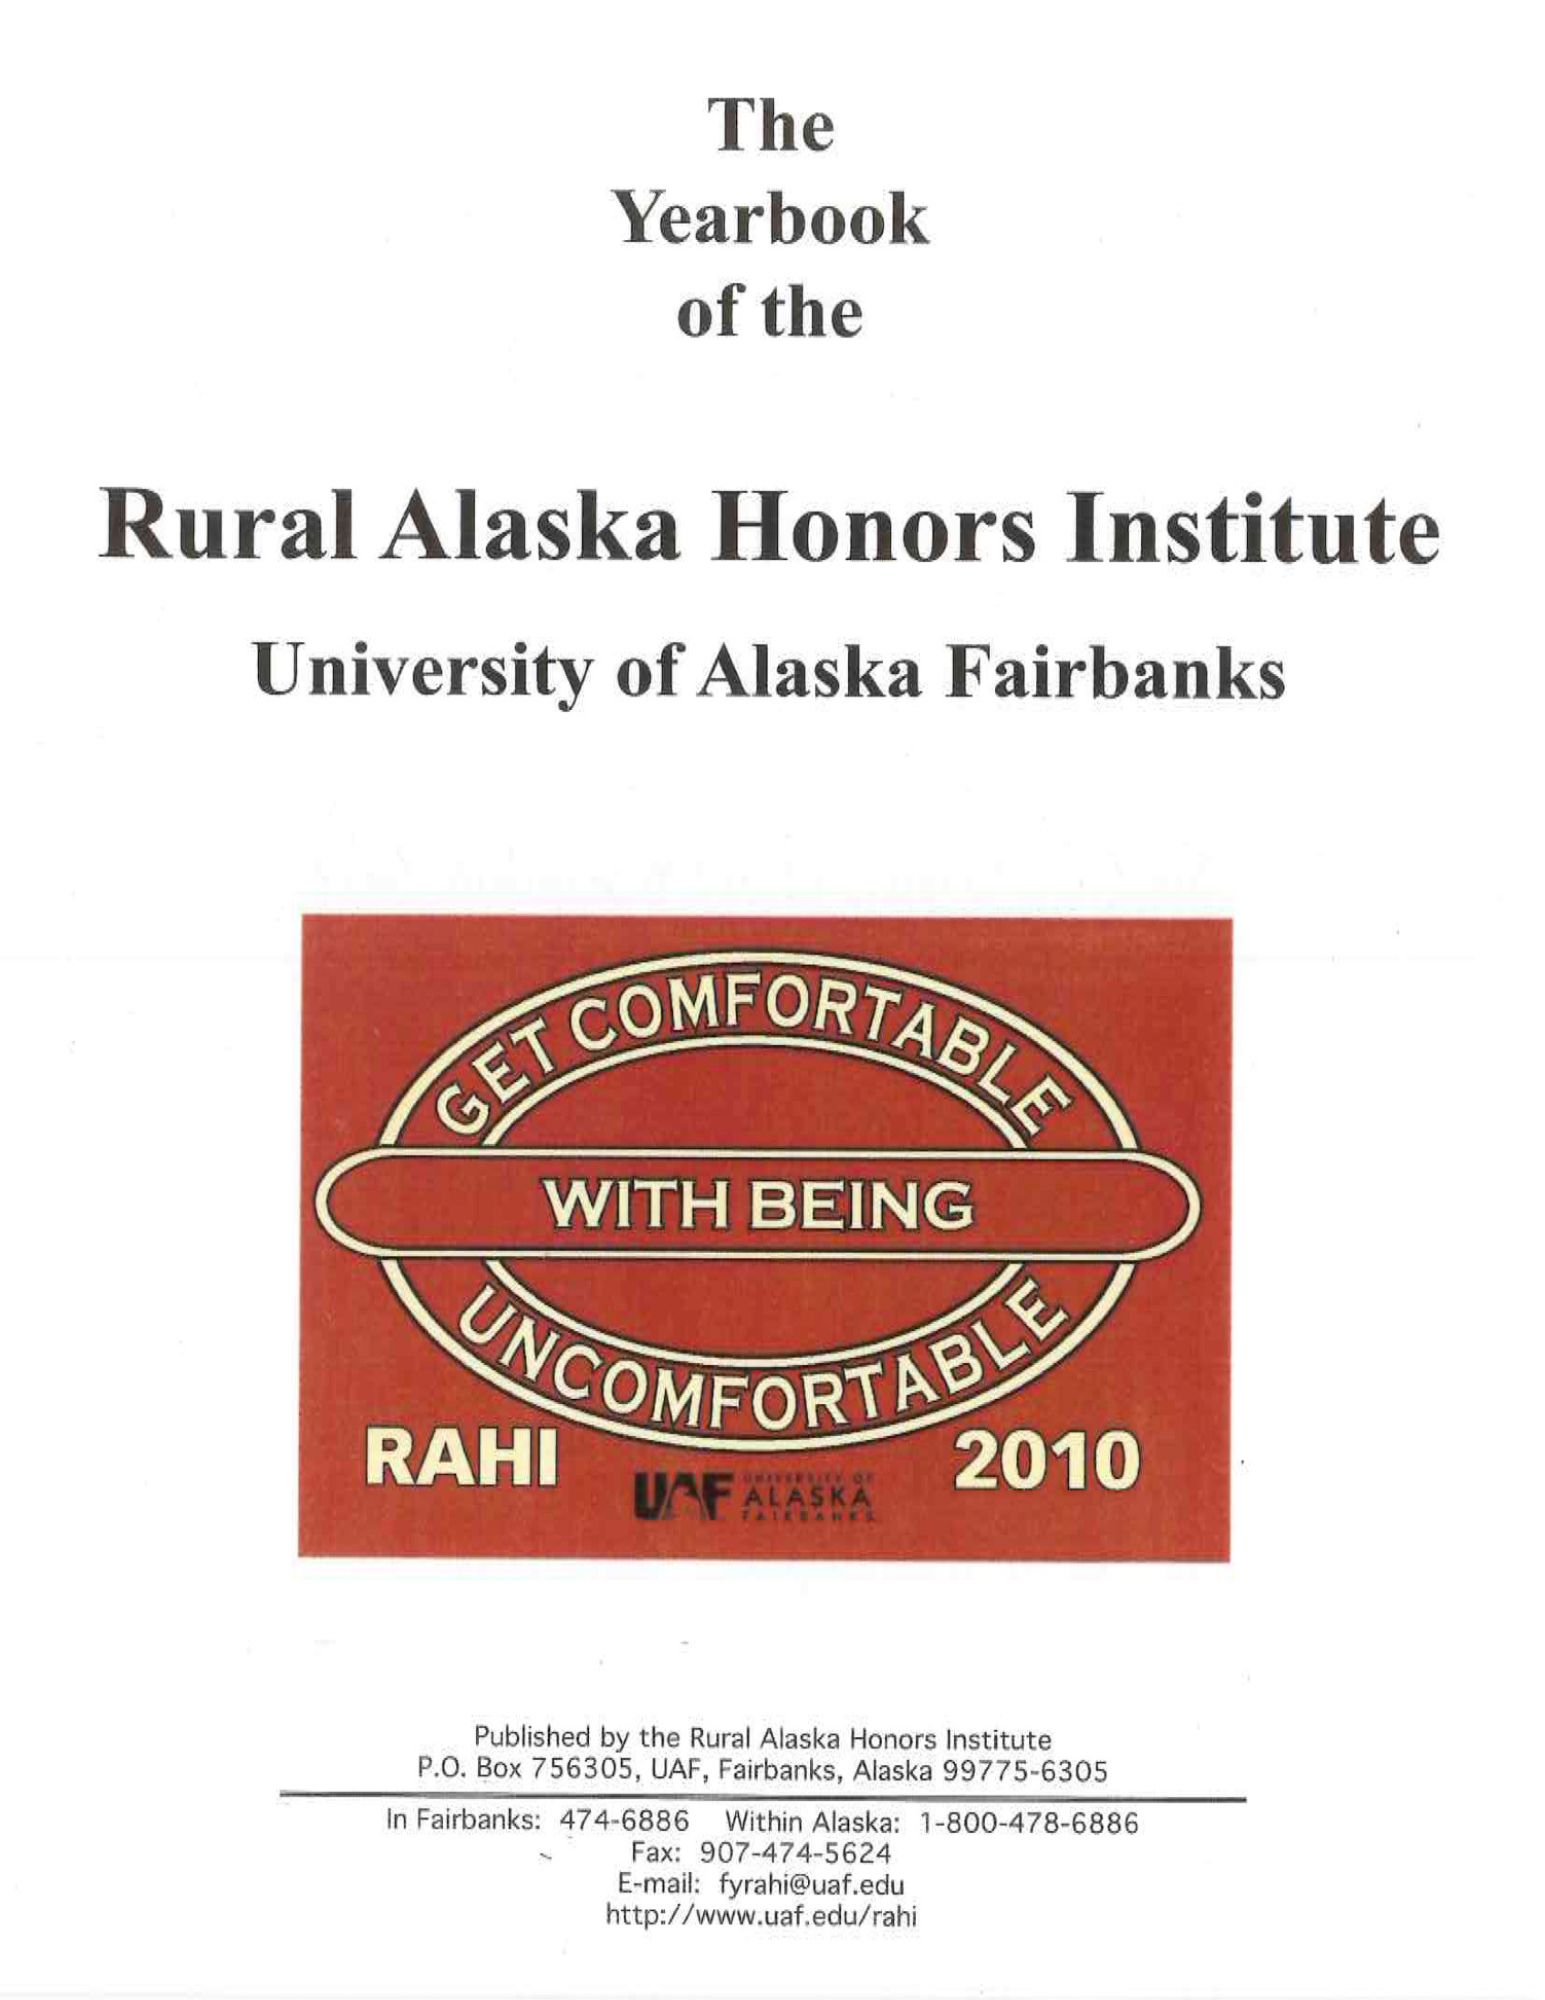 2010 Yearbook Cover